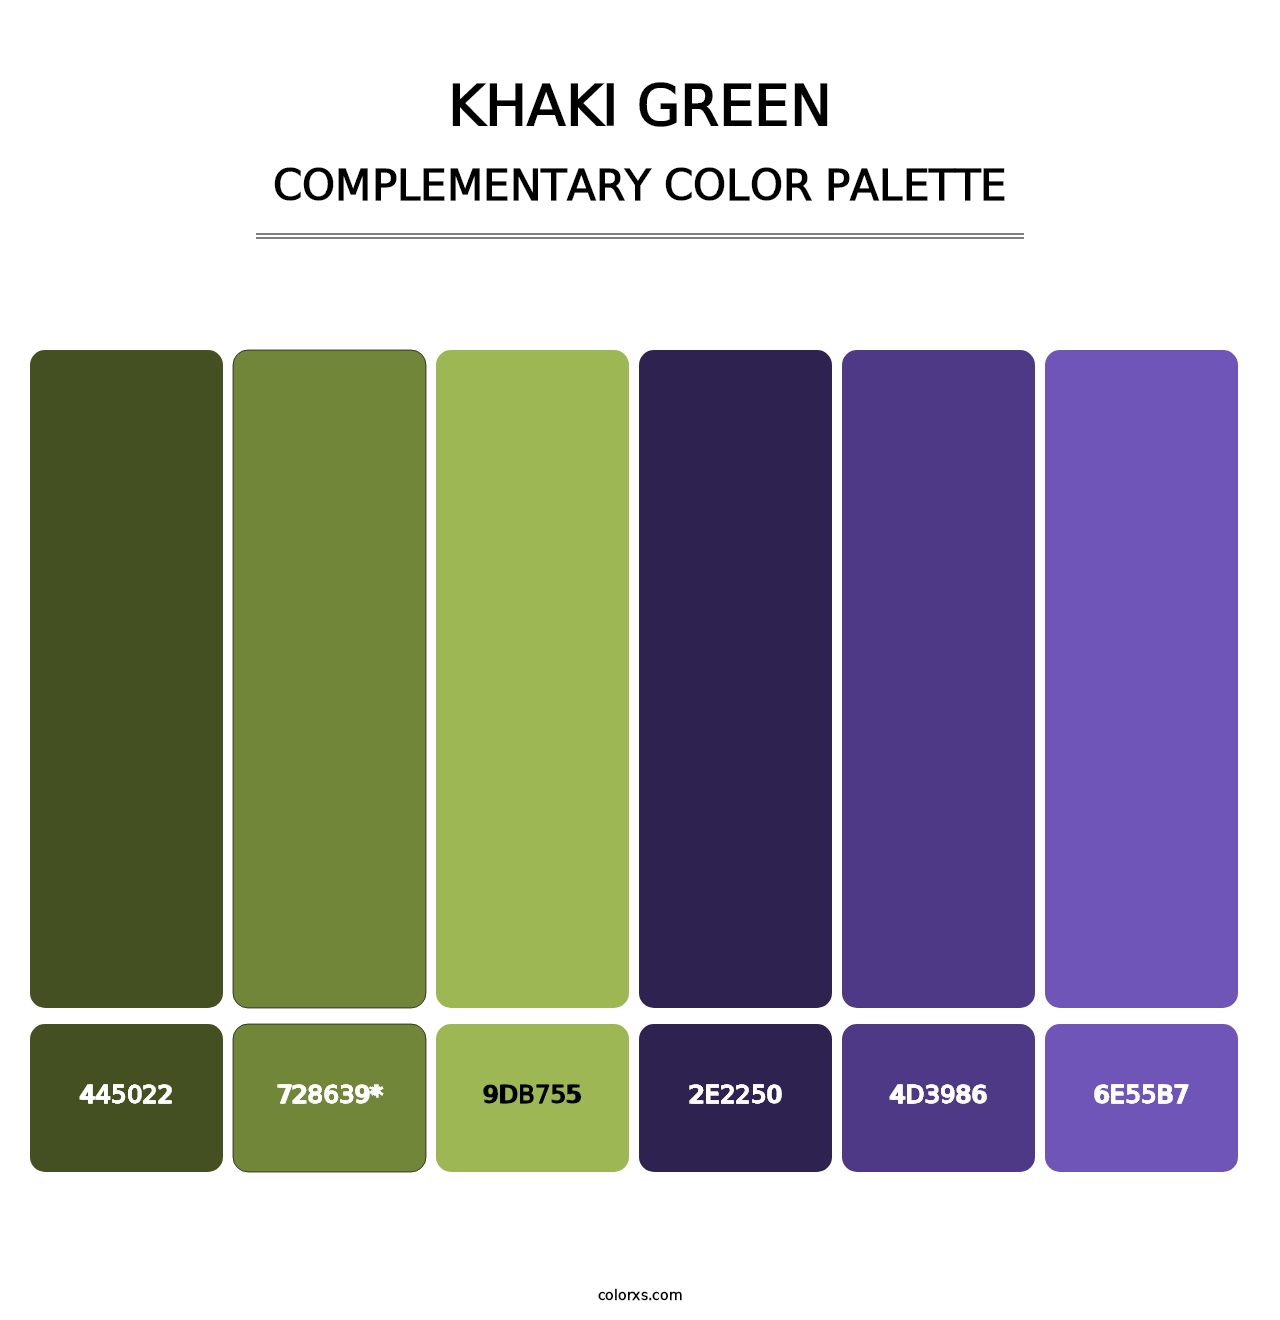 Khaki Green - Complementary Color Palette